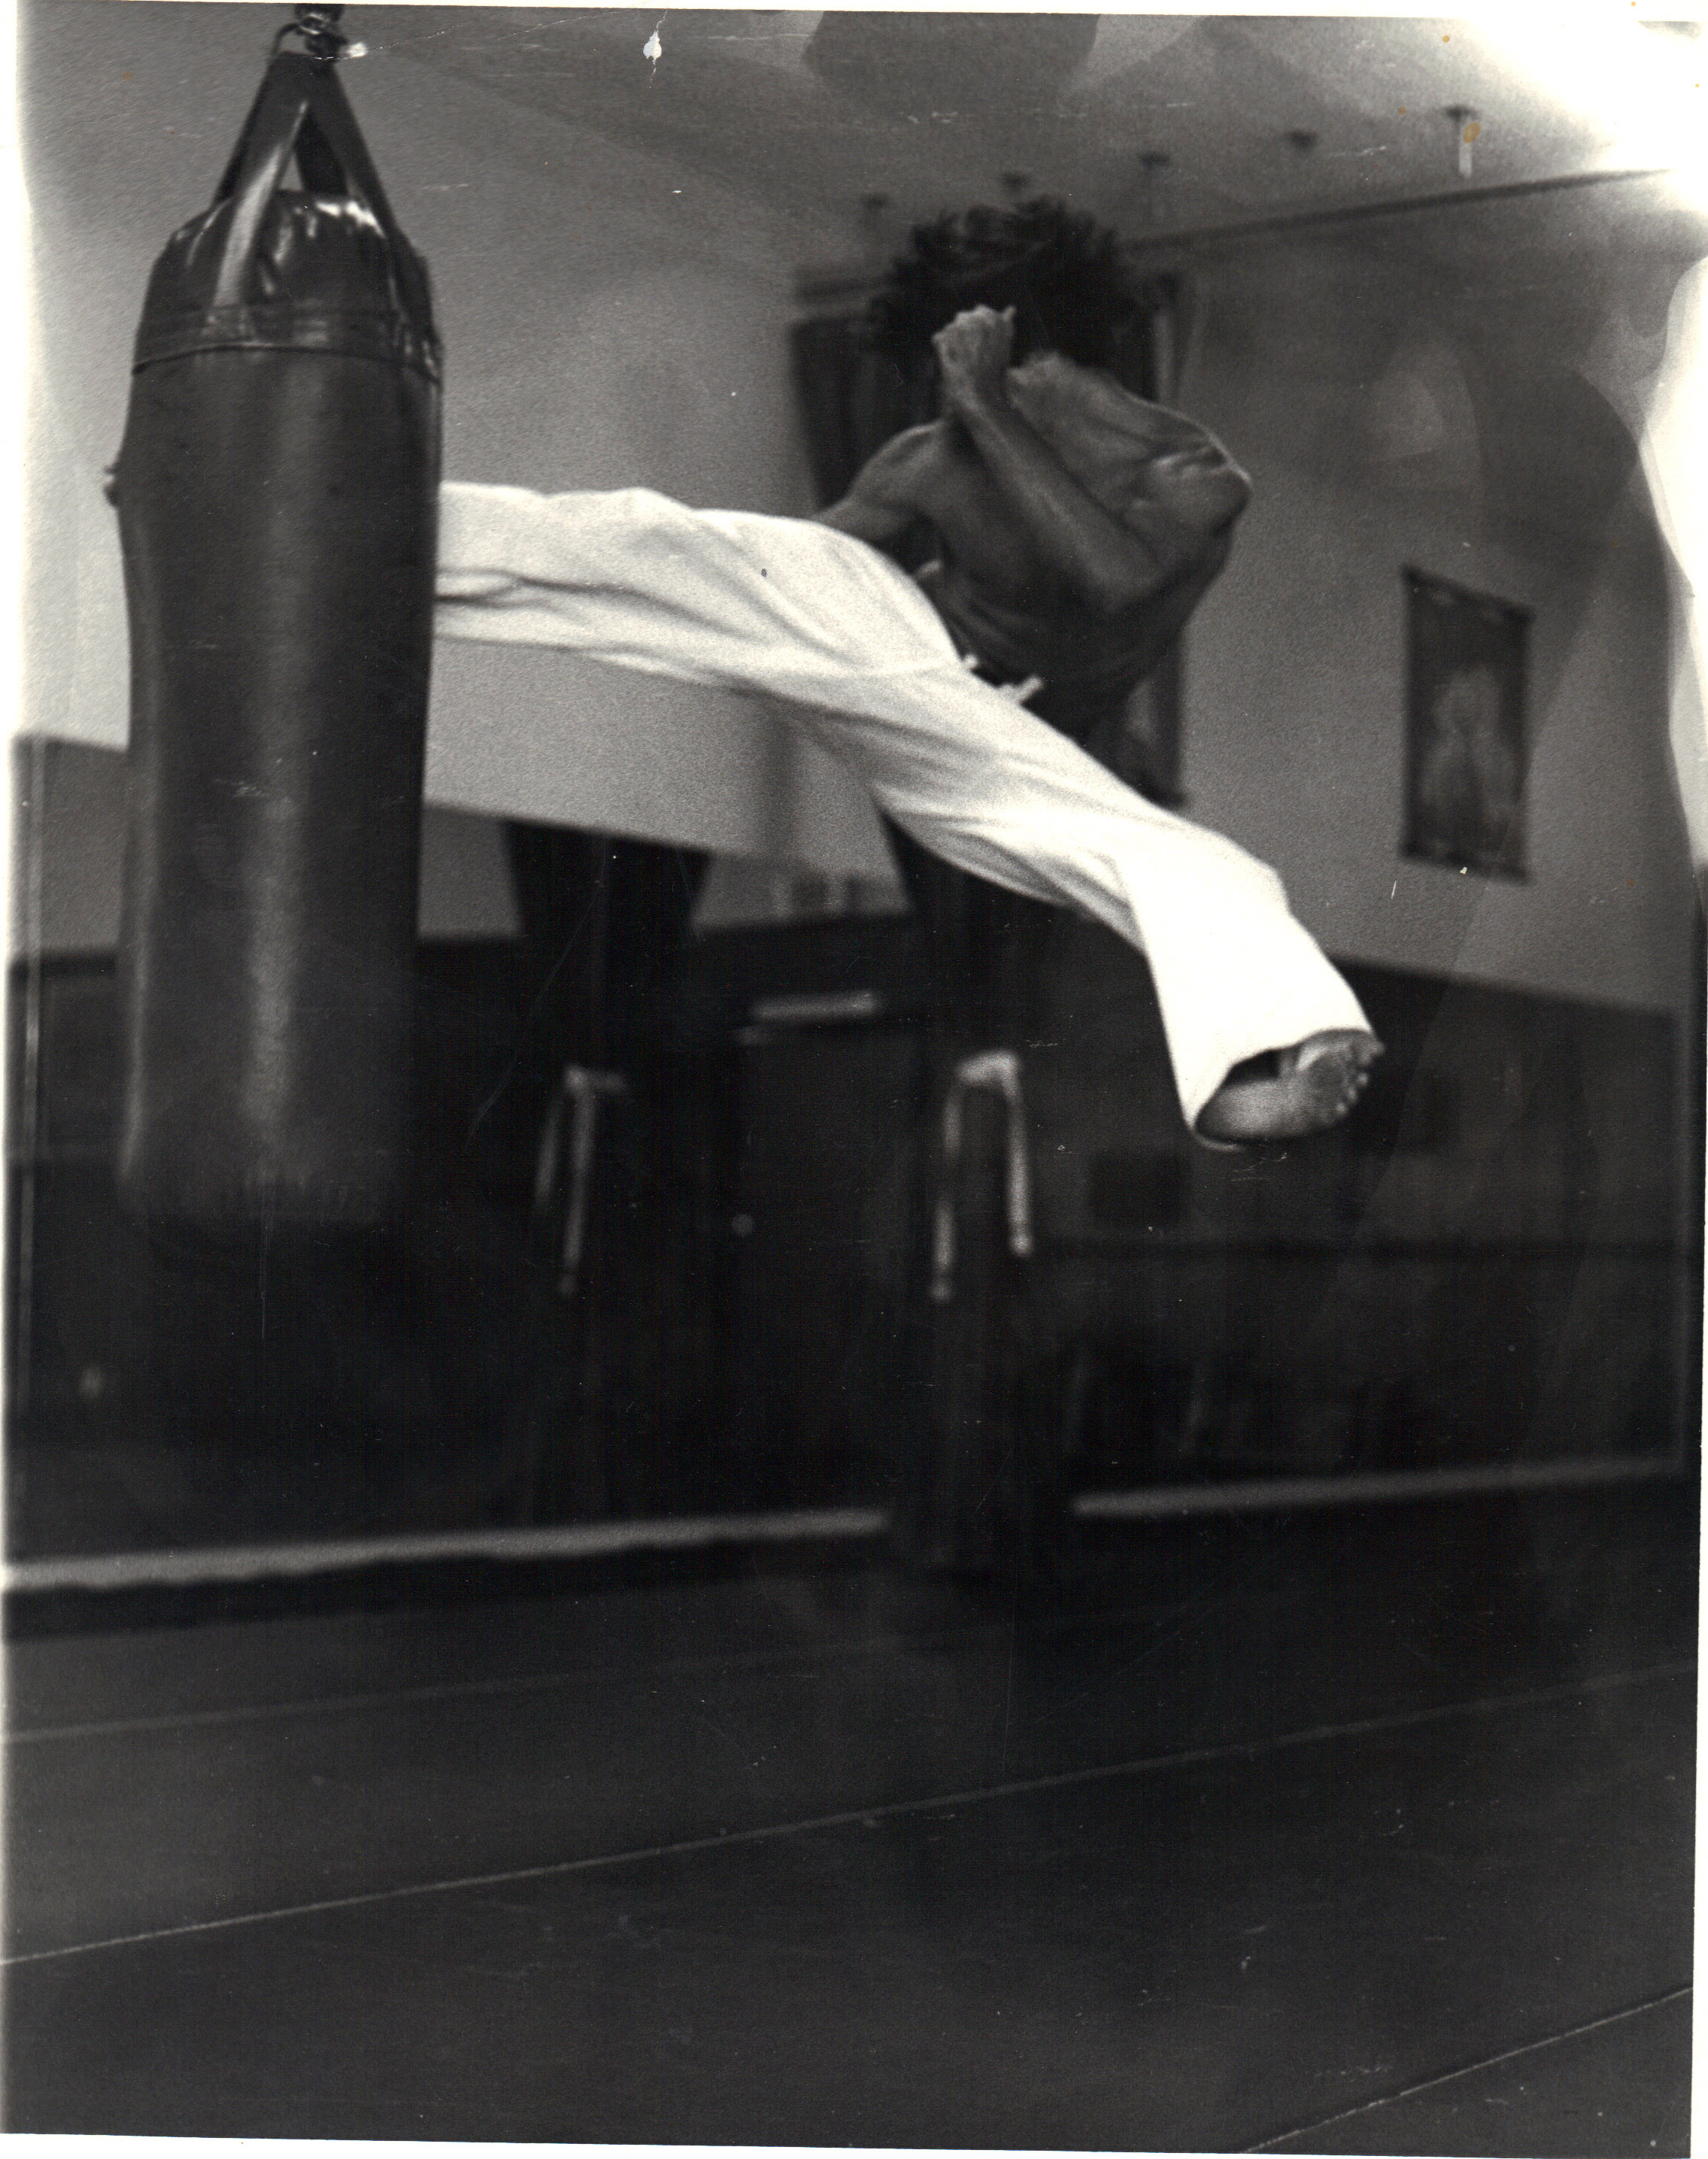 Don McGovern vintage shot,Jump spinning round kick into heavy bag. Chuck Norris days.....